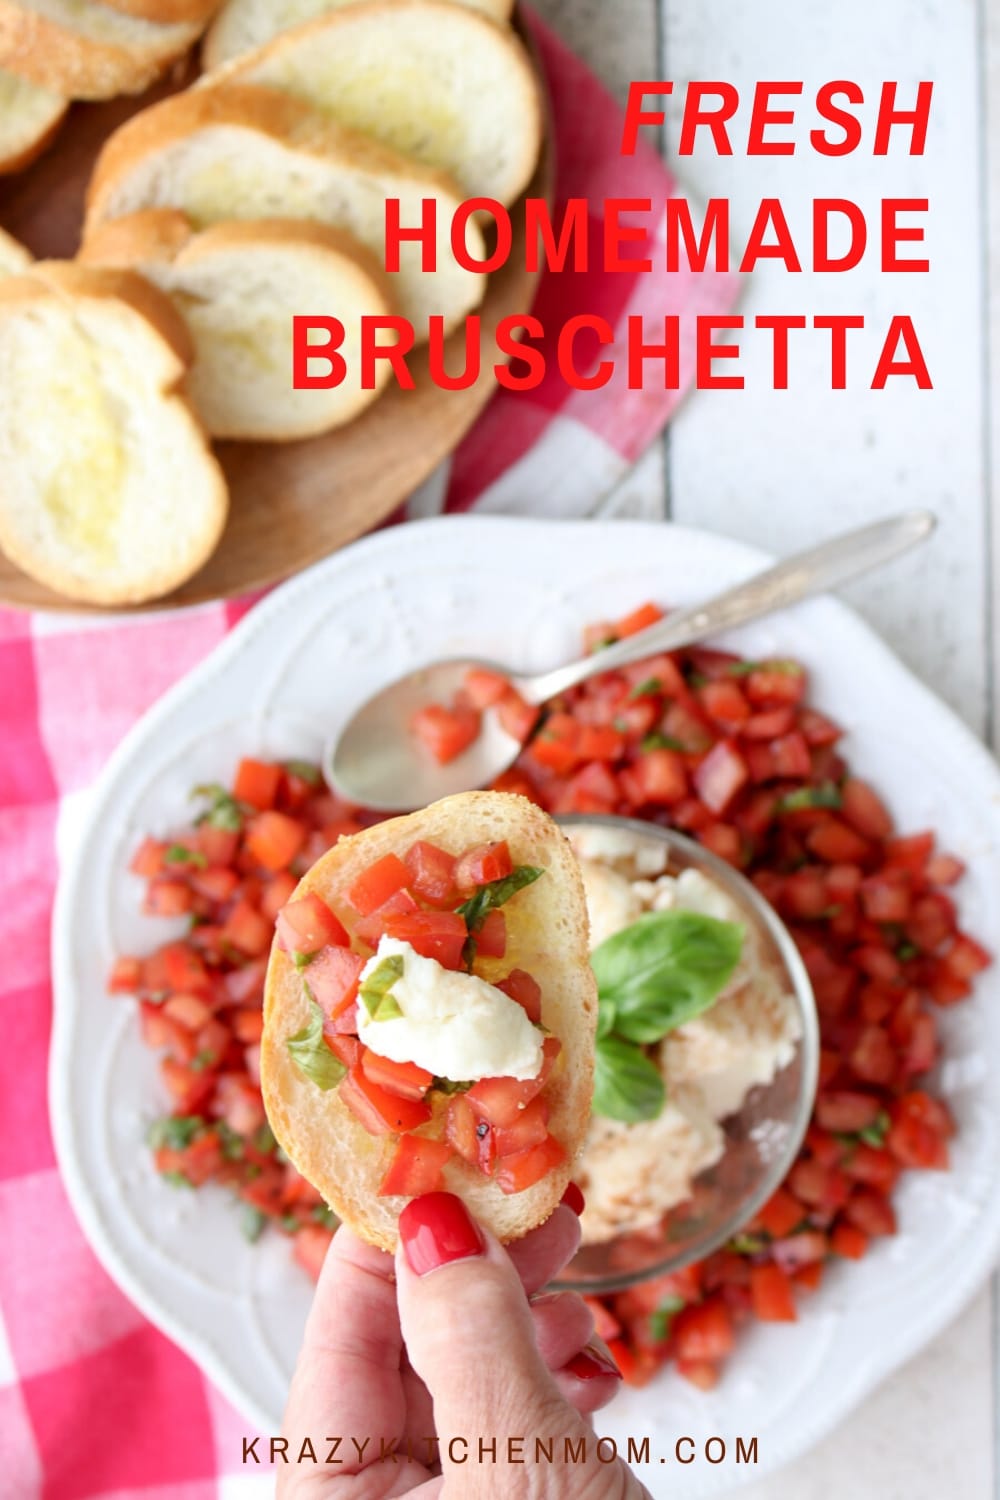 A delicious and super simple appetizer that's ready in less than 10 minutes. It's bright, fresh, and bursting with flavor. The perfect bite for a light lunch, brunch, or just an afternoon snack. via @krazykitchenmom